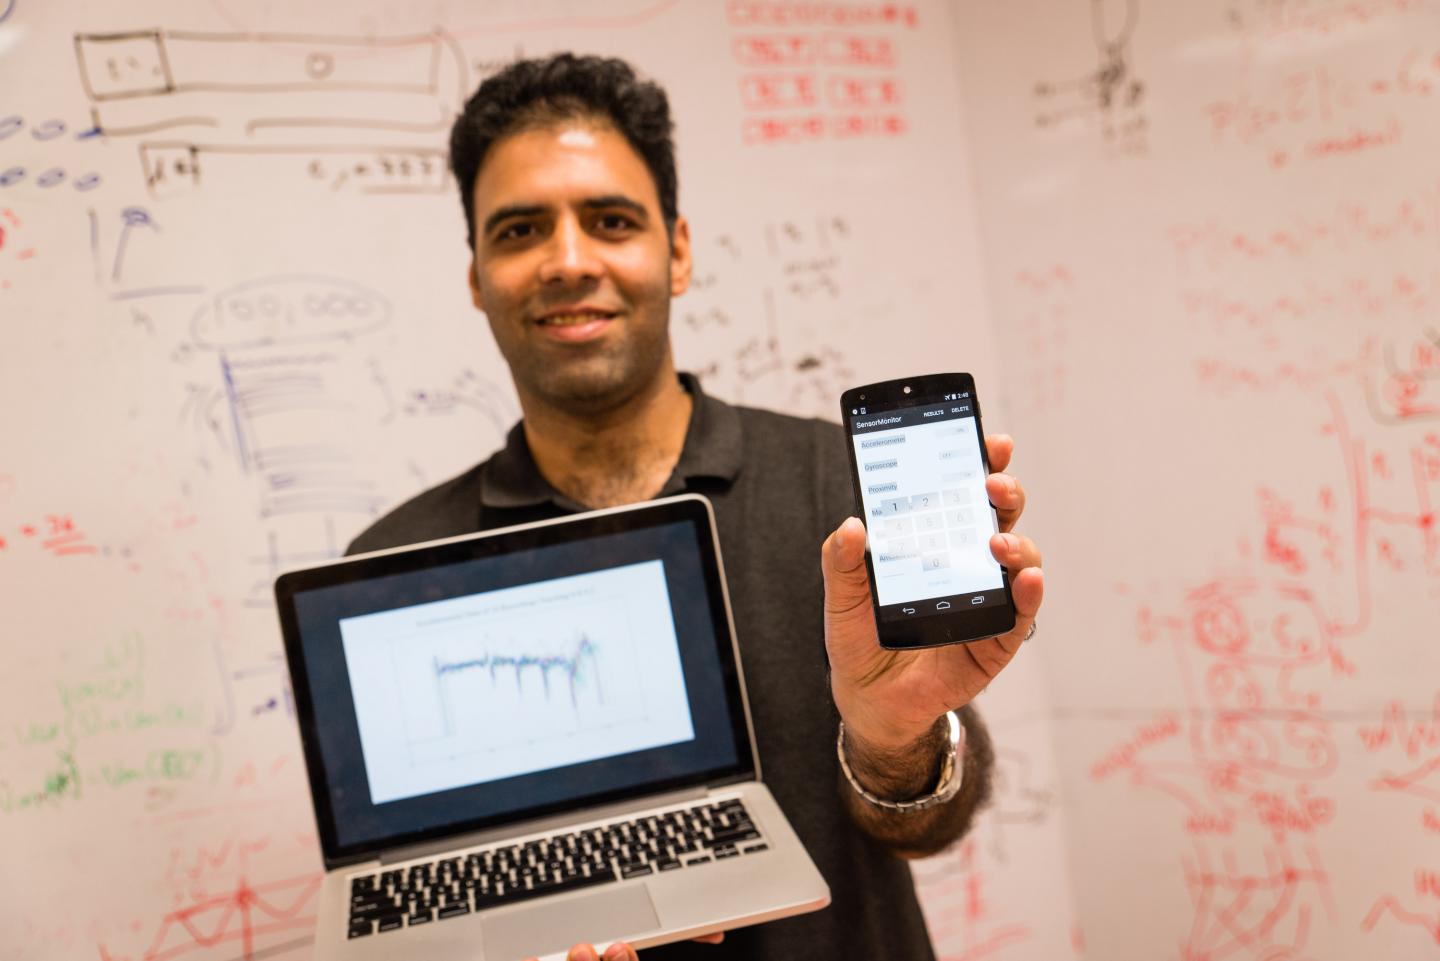 NTU scientist Dr Shivam Bhasin holding a laptop with the deep learning software and a mobile phone with their custom app. Source: NTU Singapore